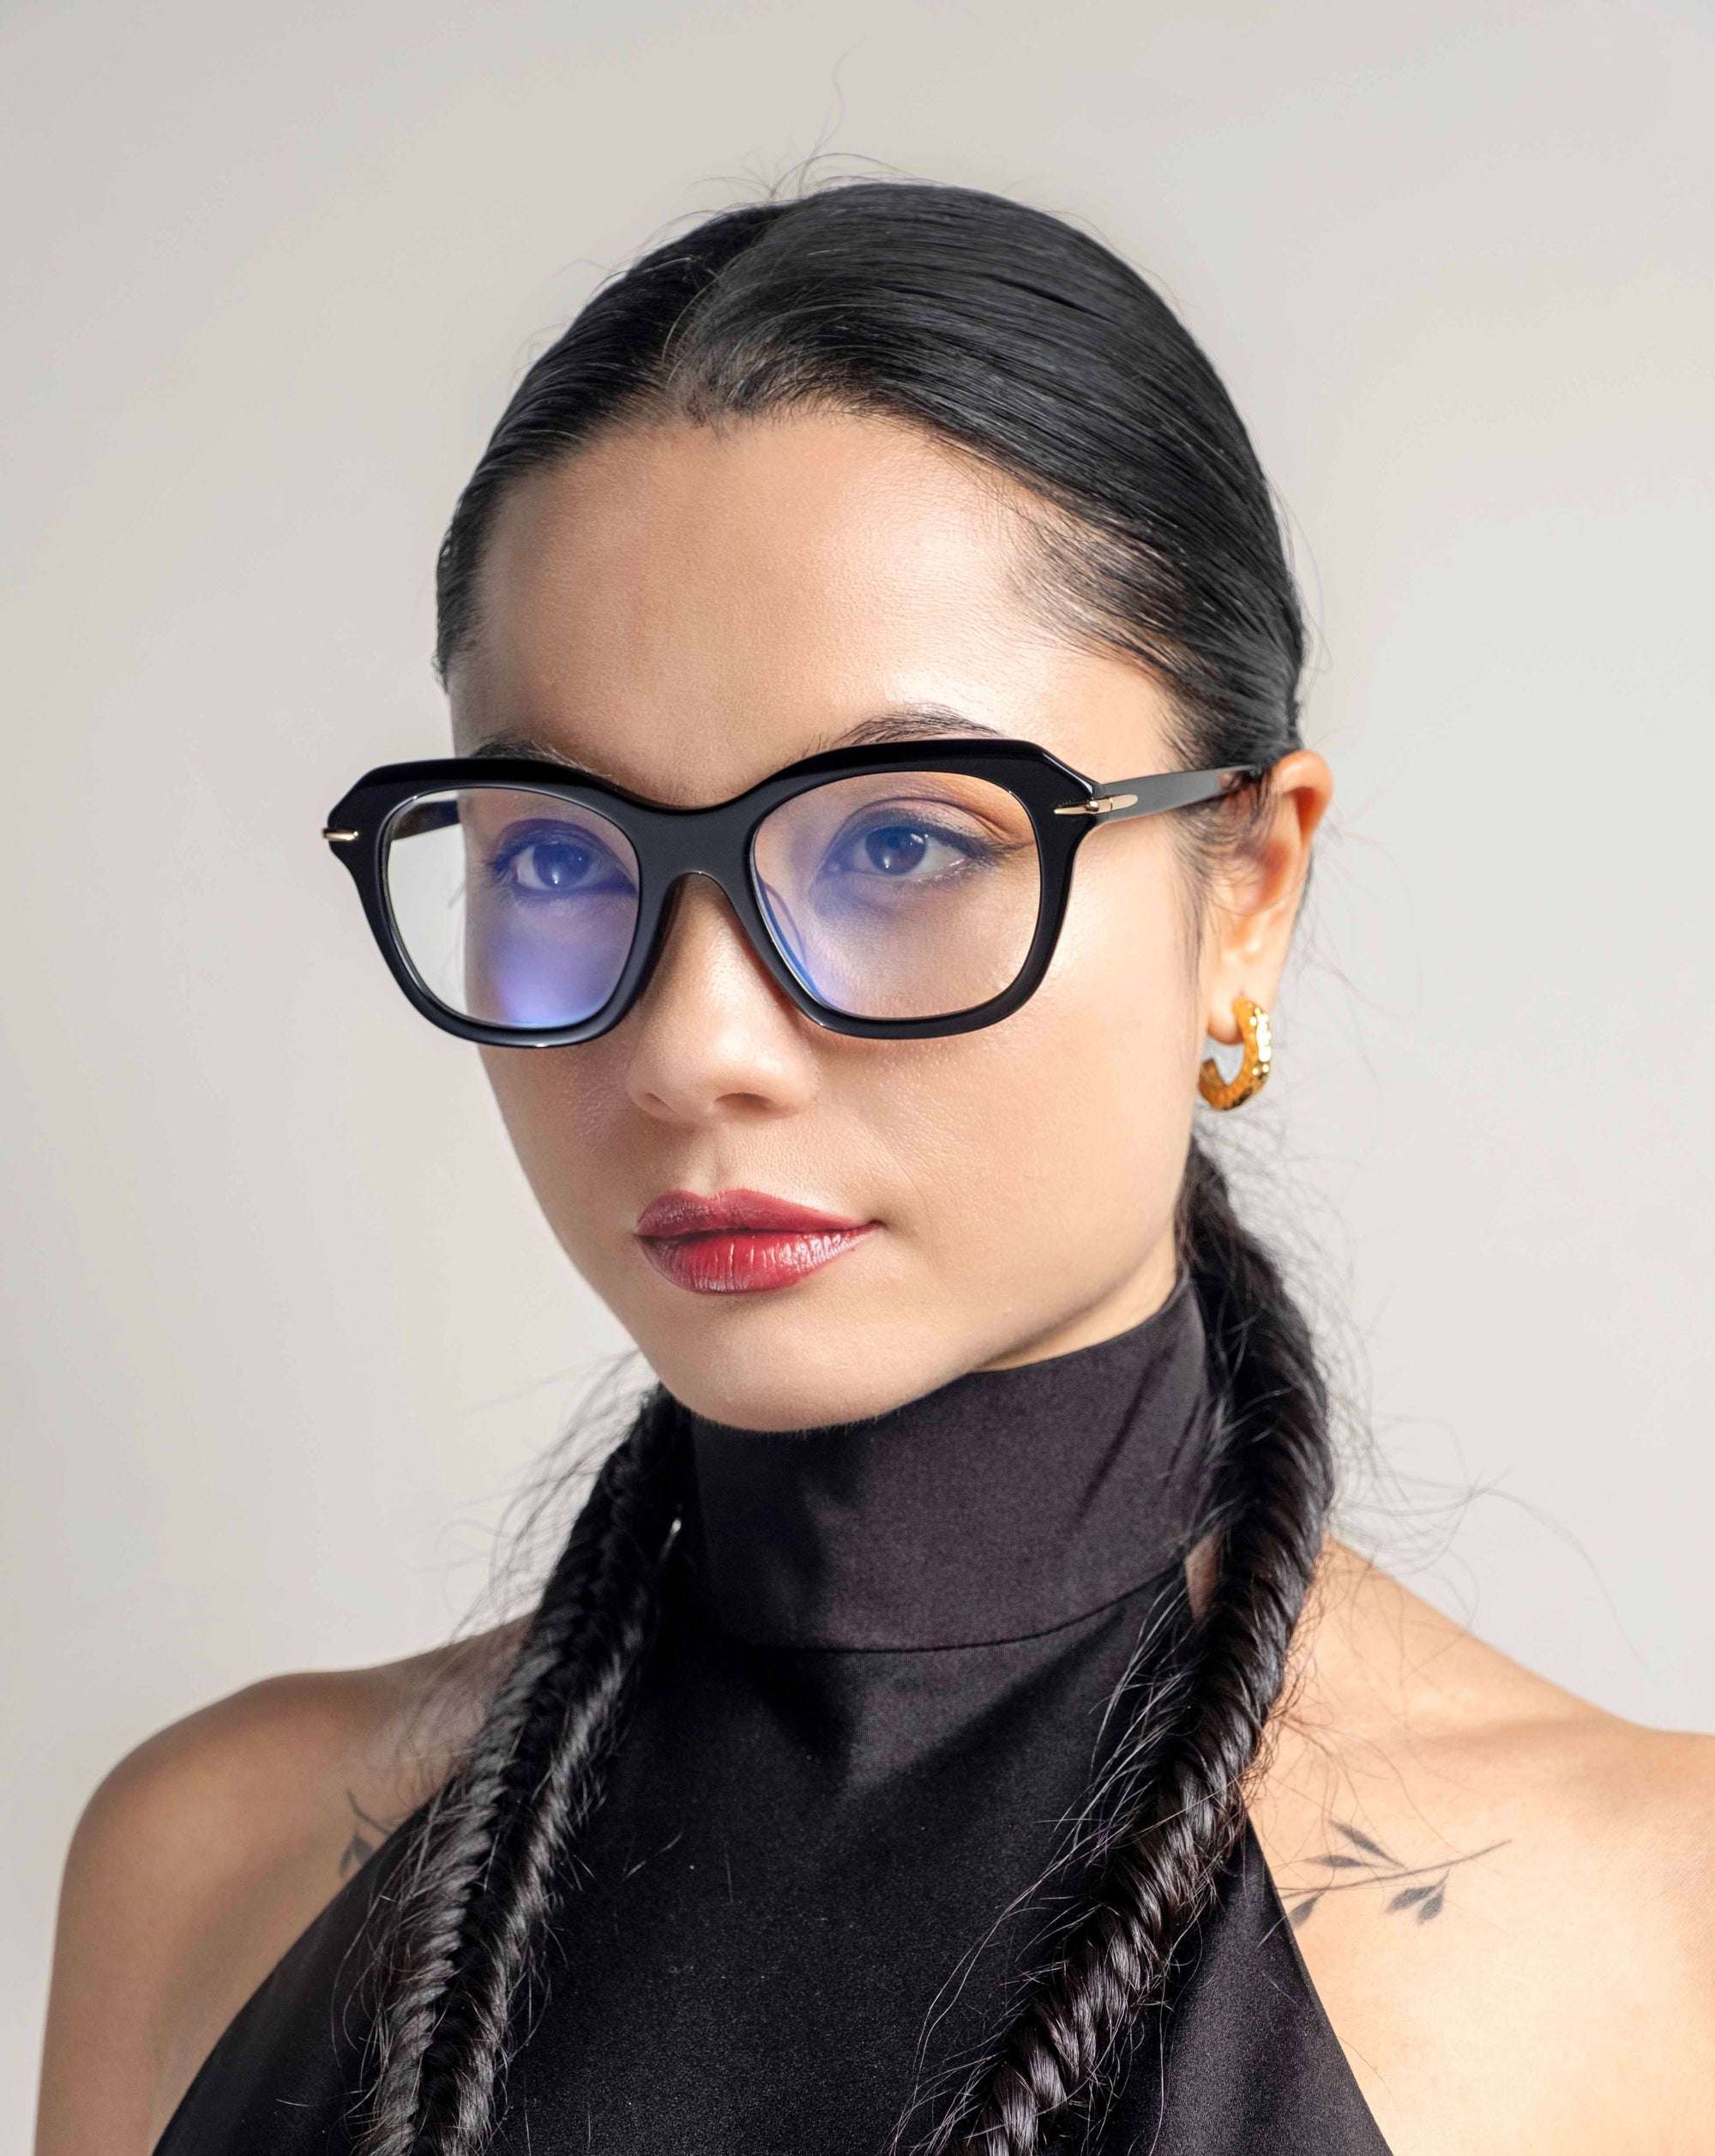 A person with long, dark hair styled in twin braids wears black-framed glasses with blue lenses. They are dressed in a black high-neck outfit and have small 18-karat gold-plated Helene hoop earrings by For Art&#39;s Sake®. The background is neutral, focusing attention on the person.